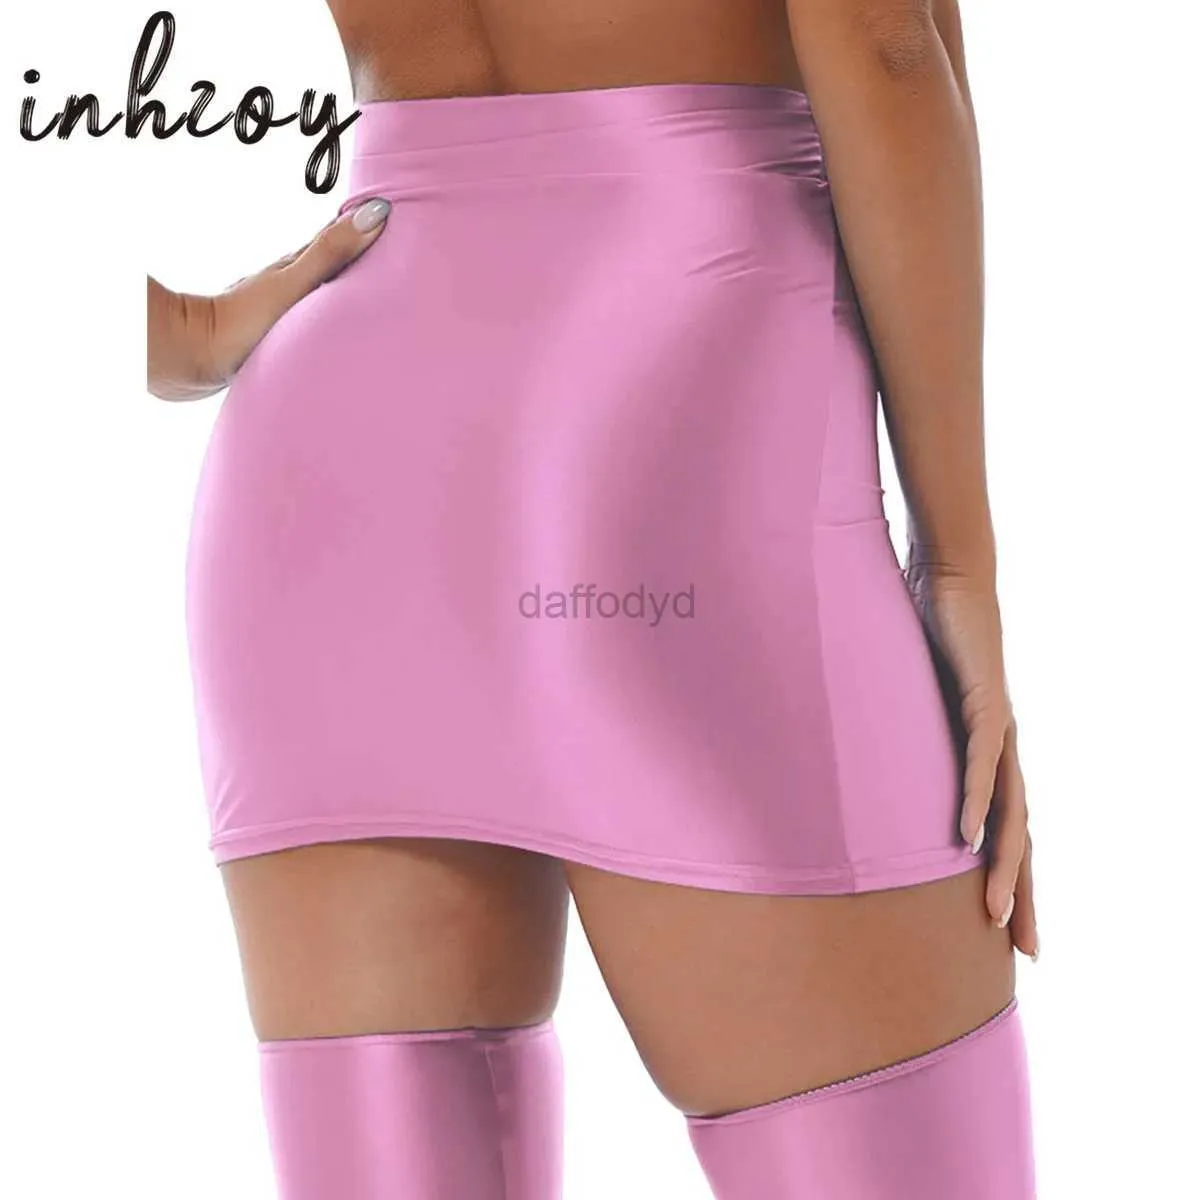 Robes sexy urbaines Femmes Blossy Jupe crayon Huile Bodycon Bodycon Miniskirt haute taille Booty Clubwear Pole Dance Tenue de nuit Costume Rave 240403